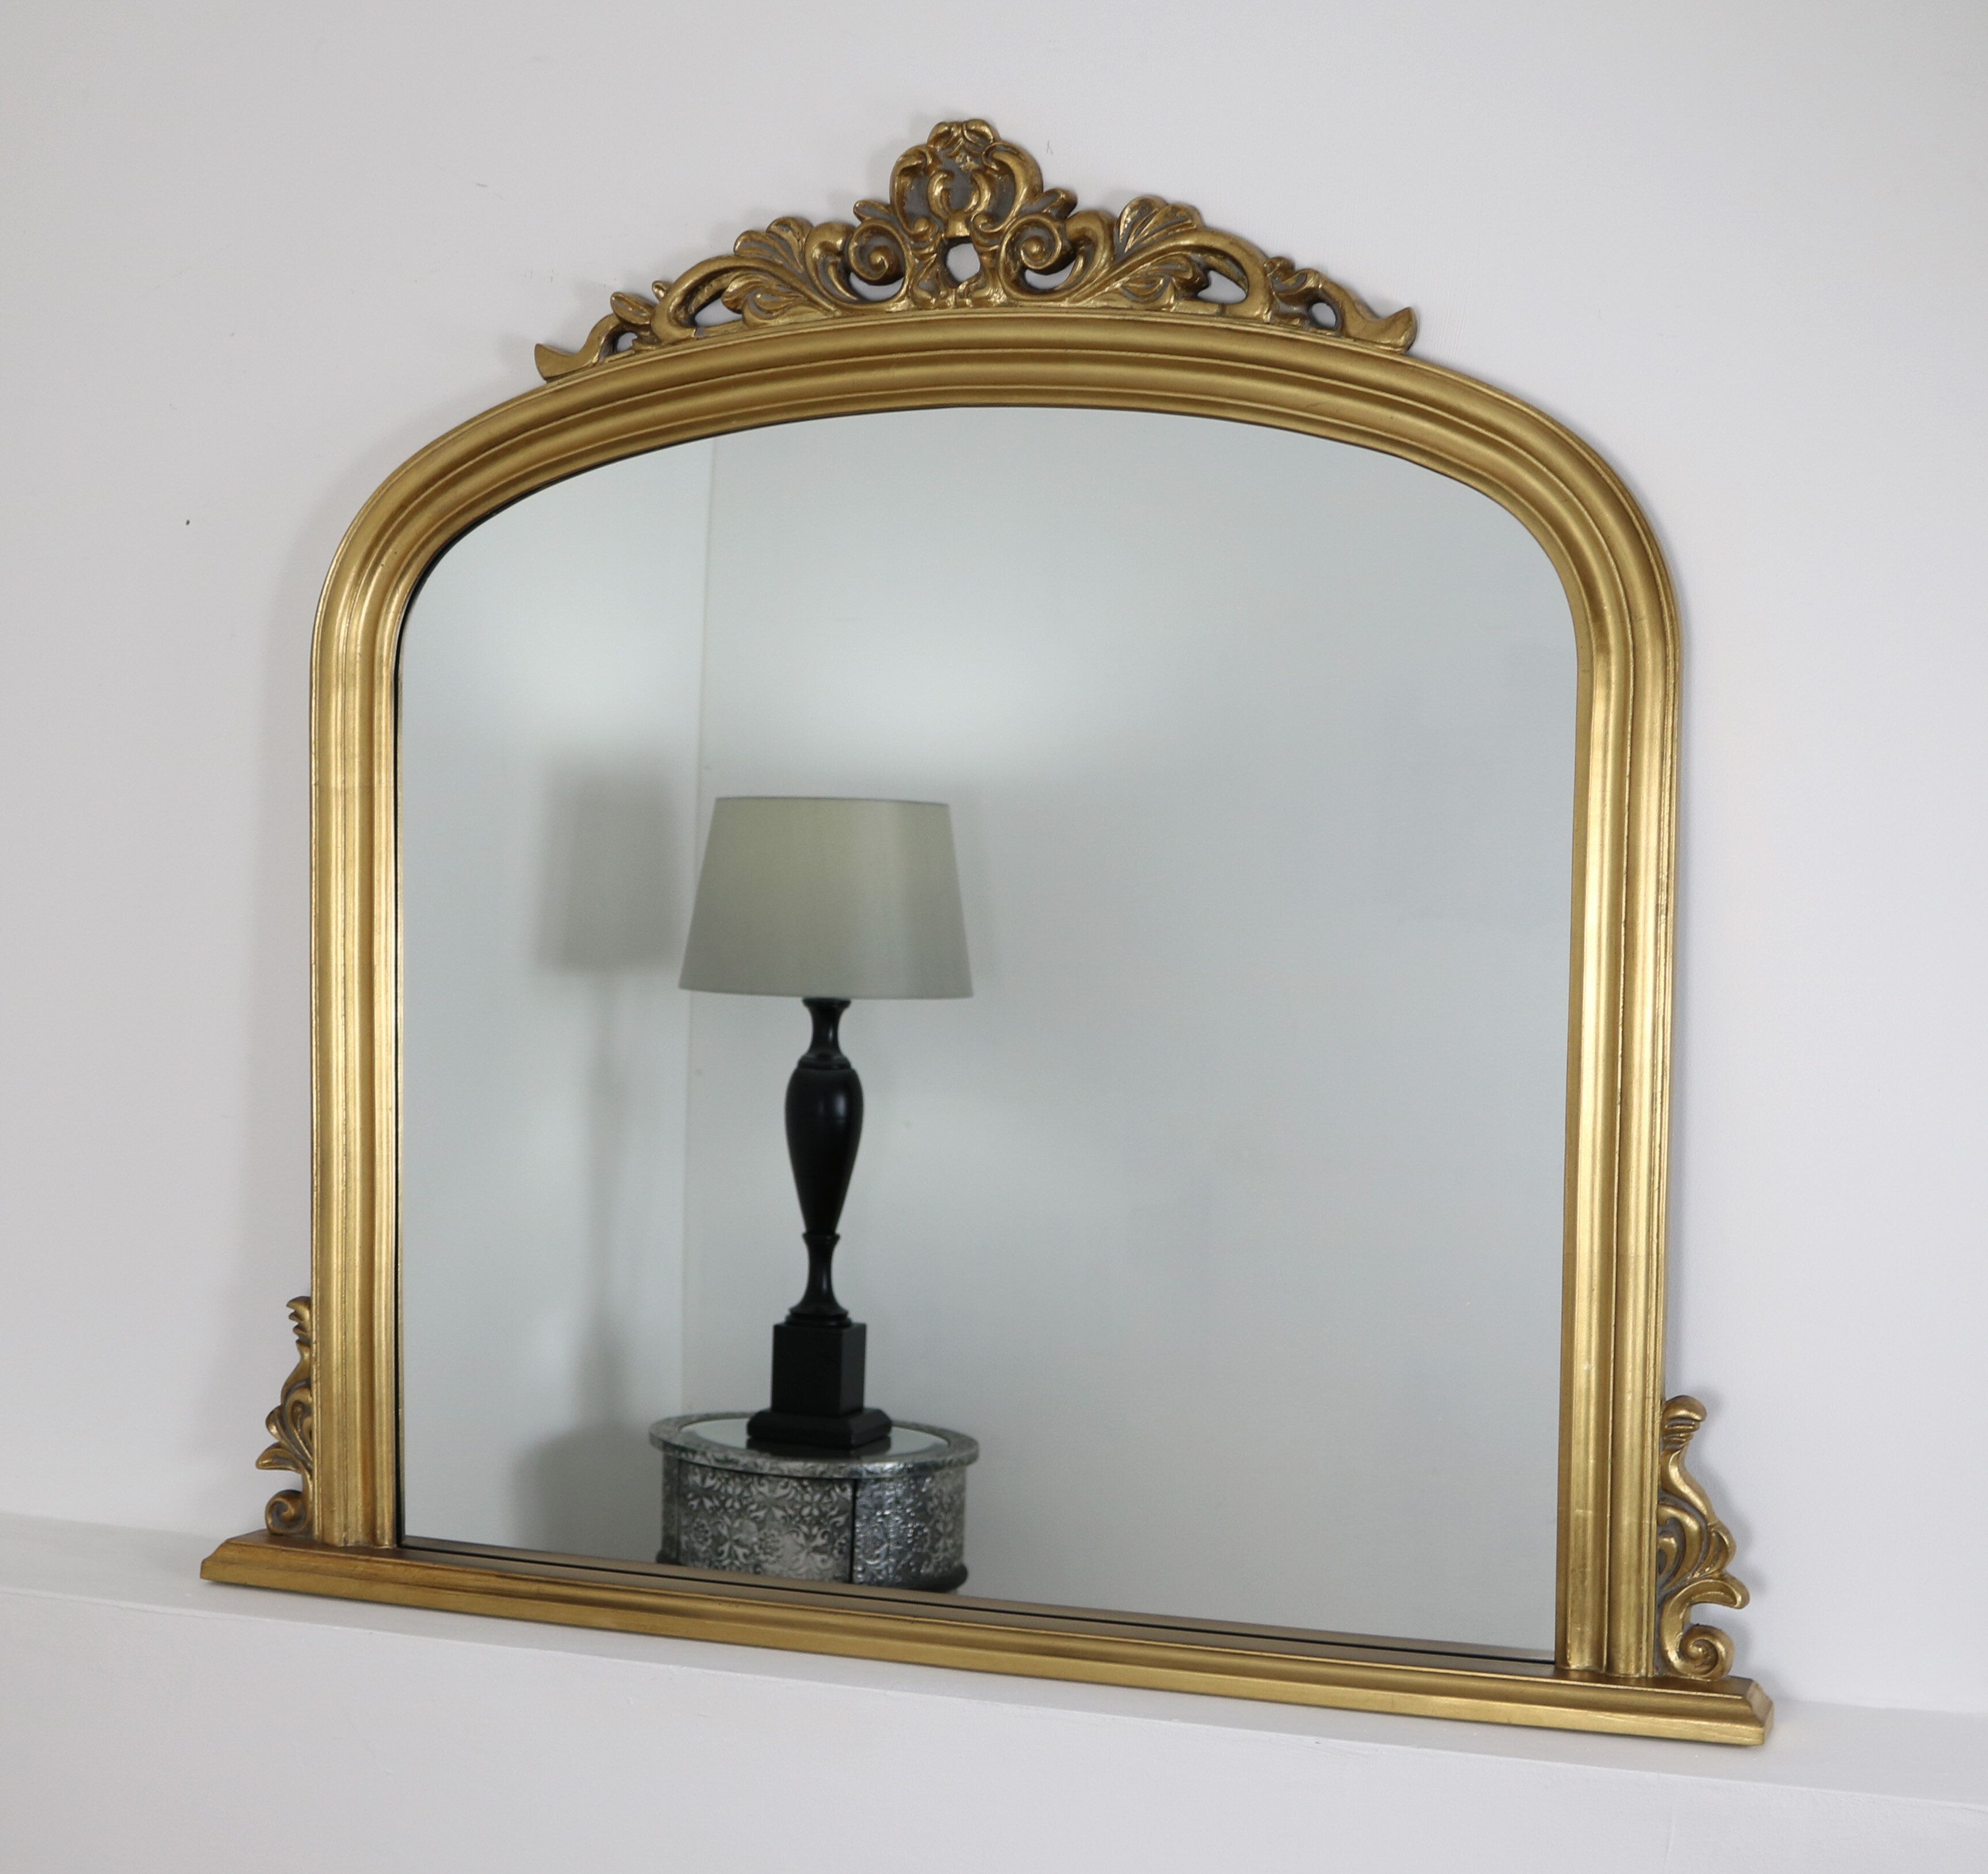 Juliana Accent Mirror Pertaining To Juliana Accent Mirrors (View 3 of 20)